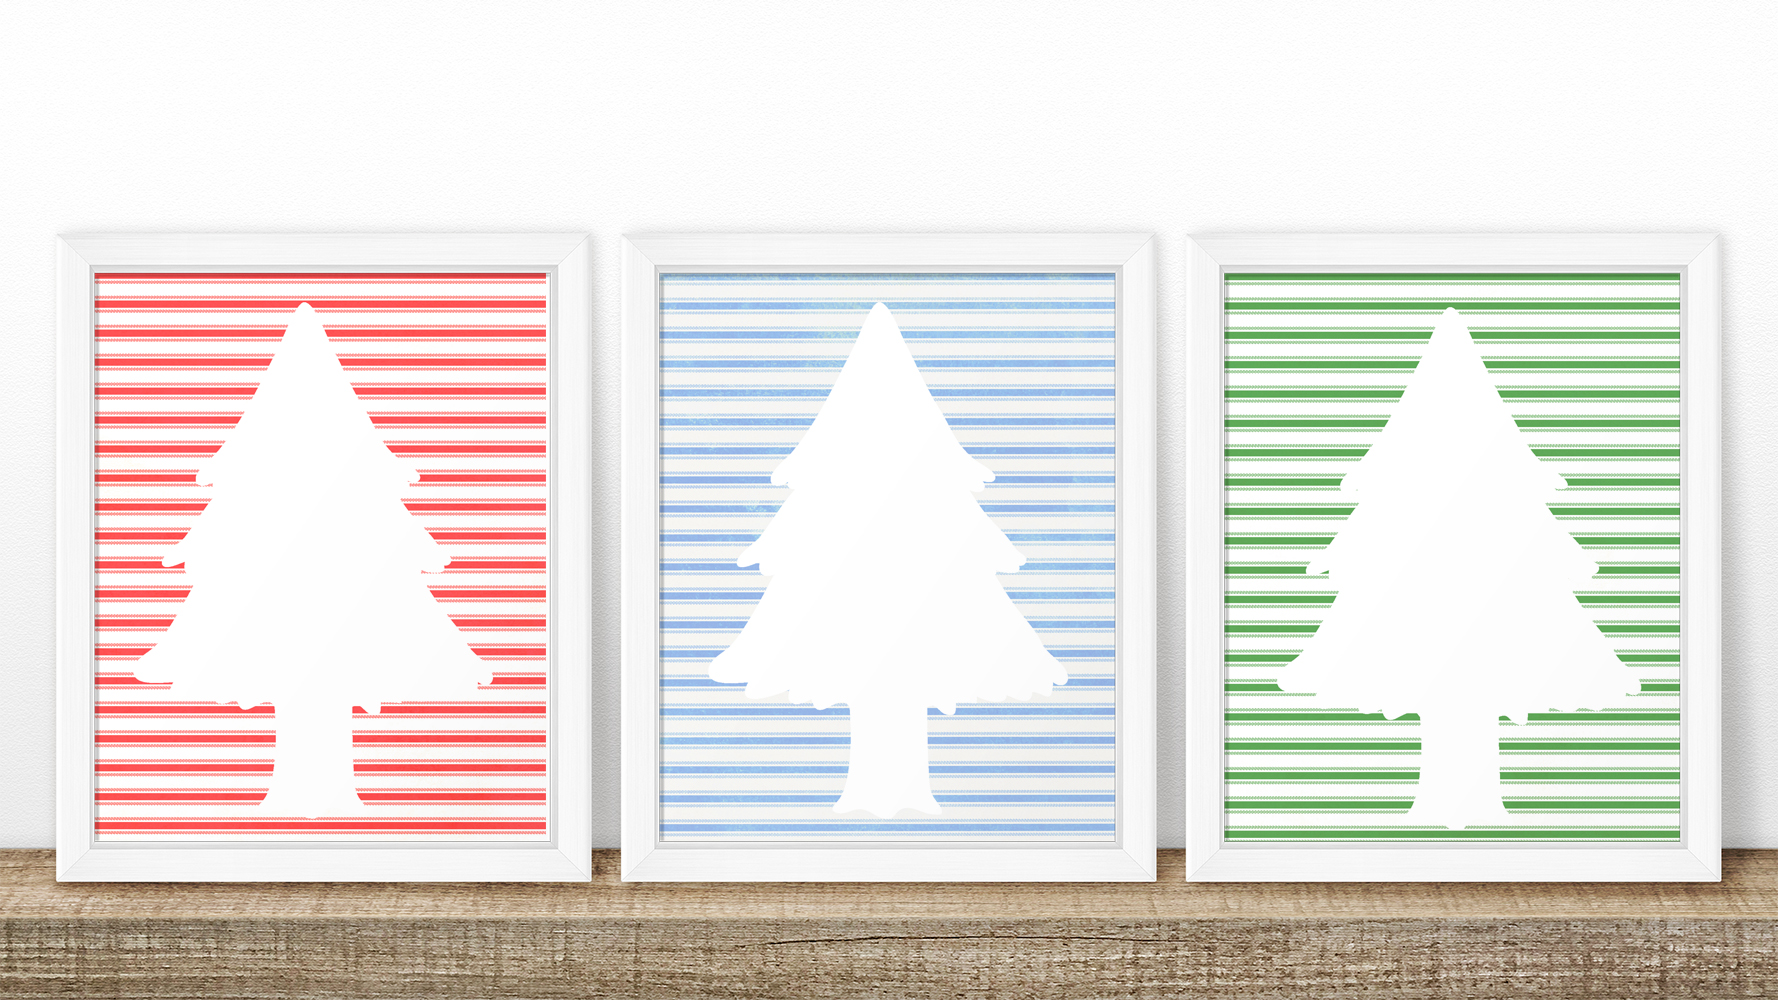 Red Green and Blue Farmhouse Christmas in Ticking Stripes by Peanut Prints on Etsy.